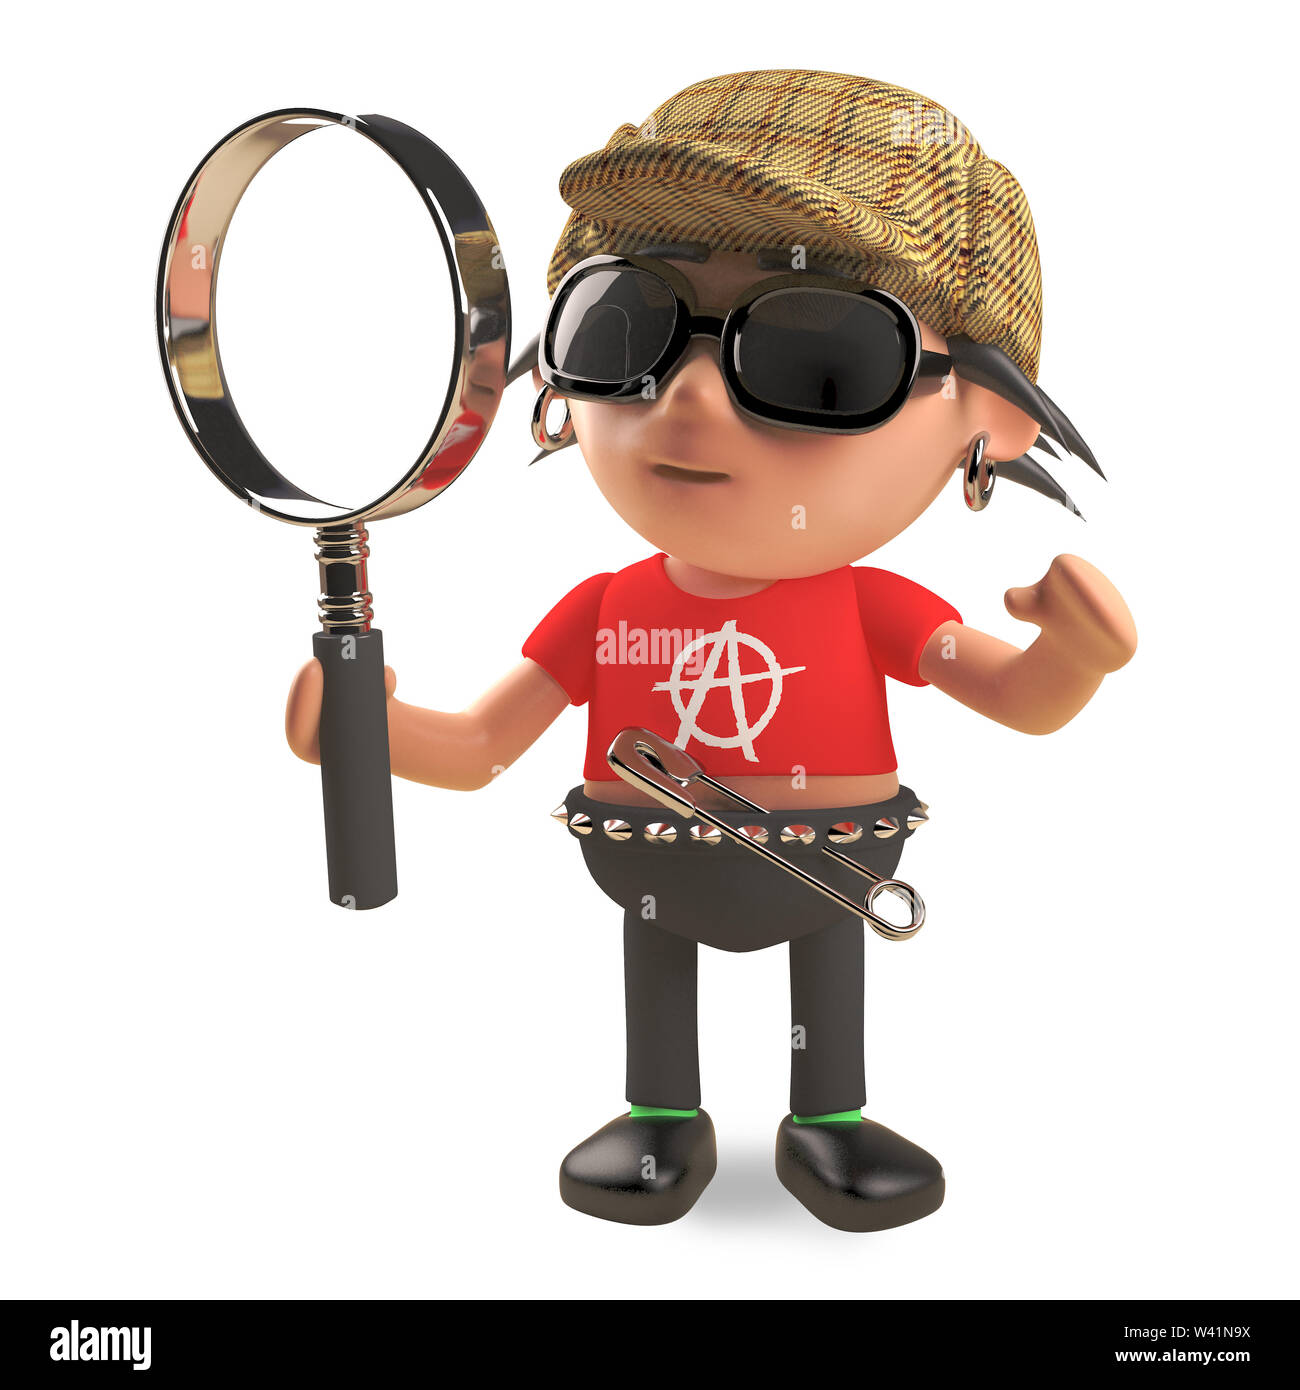 Clever detective punk rocker with spikey hair and deerstalker hat holding a magnifying glass looking for clues, 3d illustration render Stock Photo